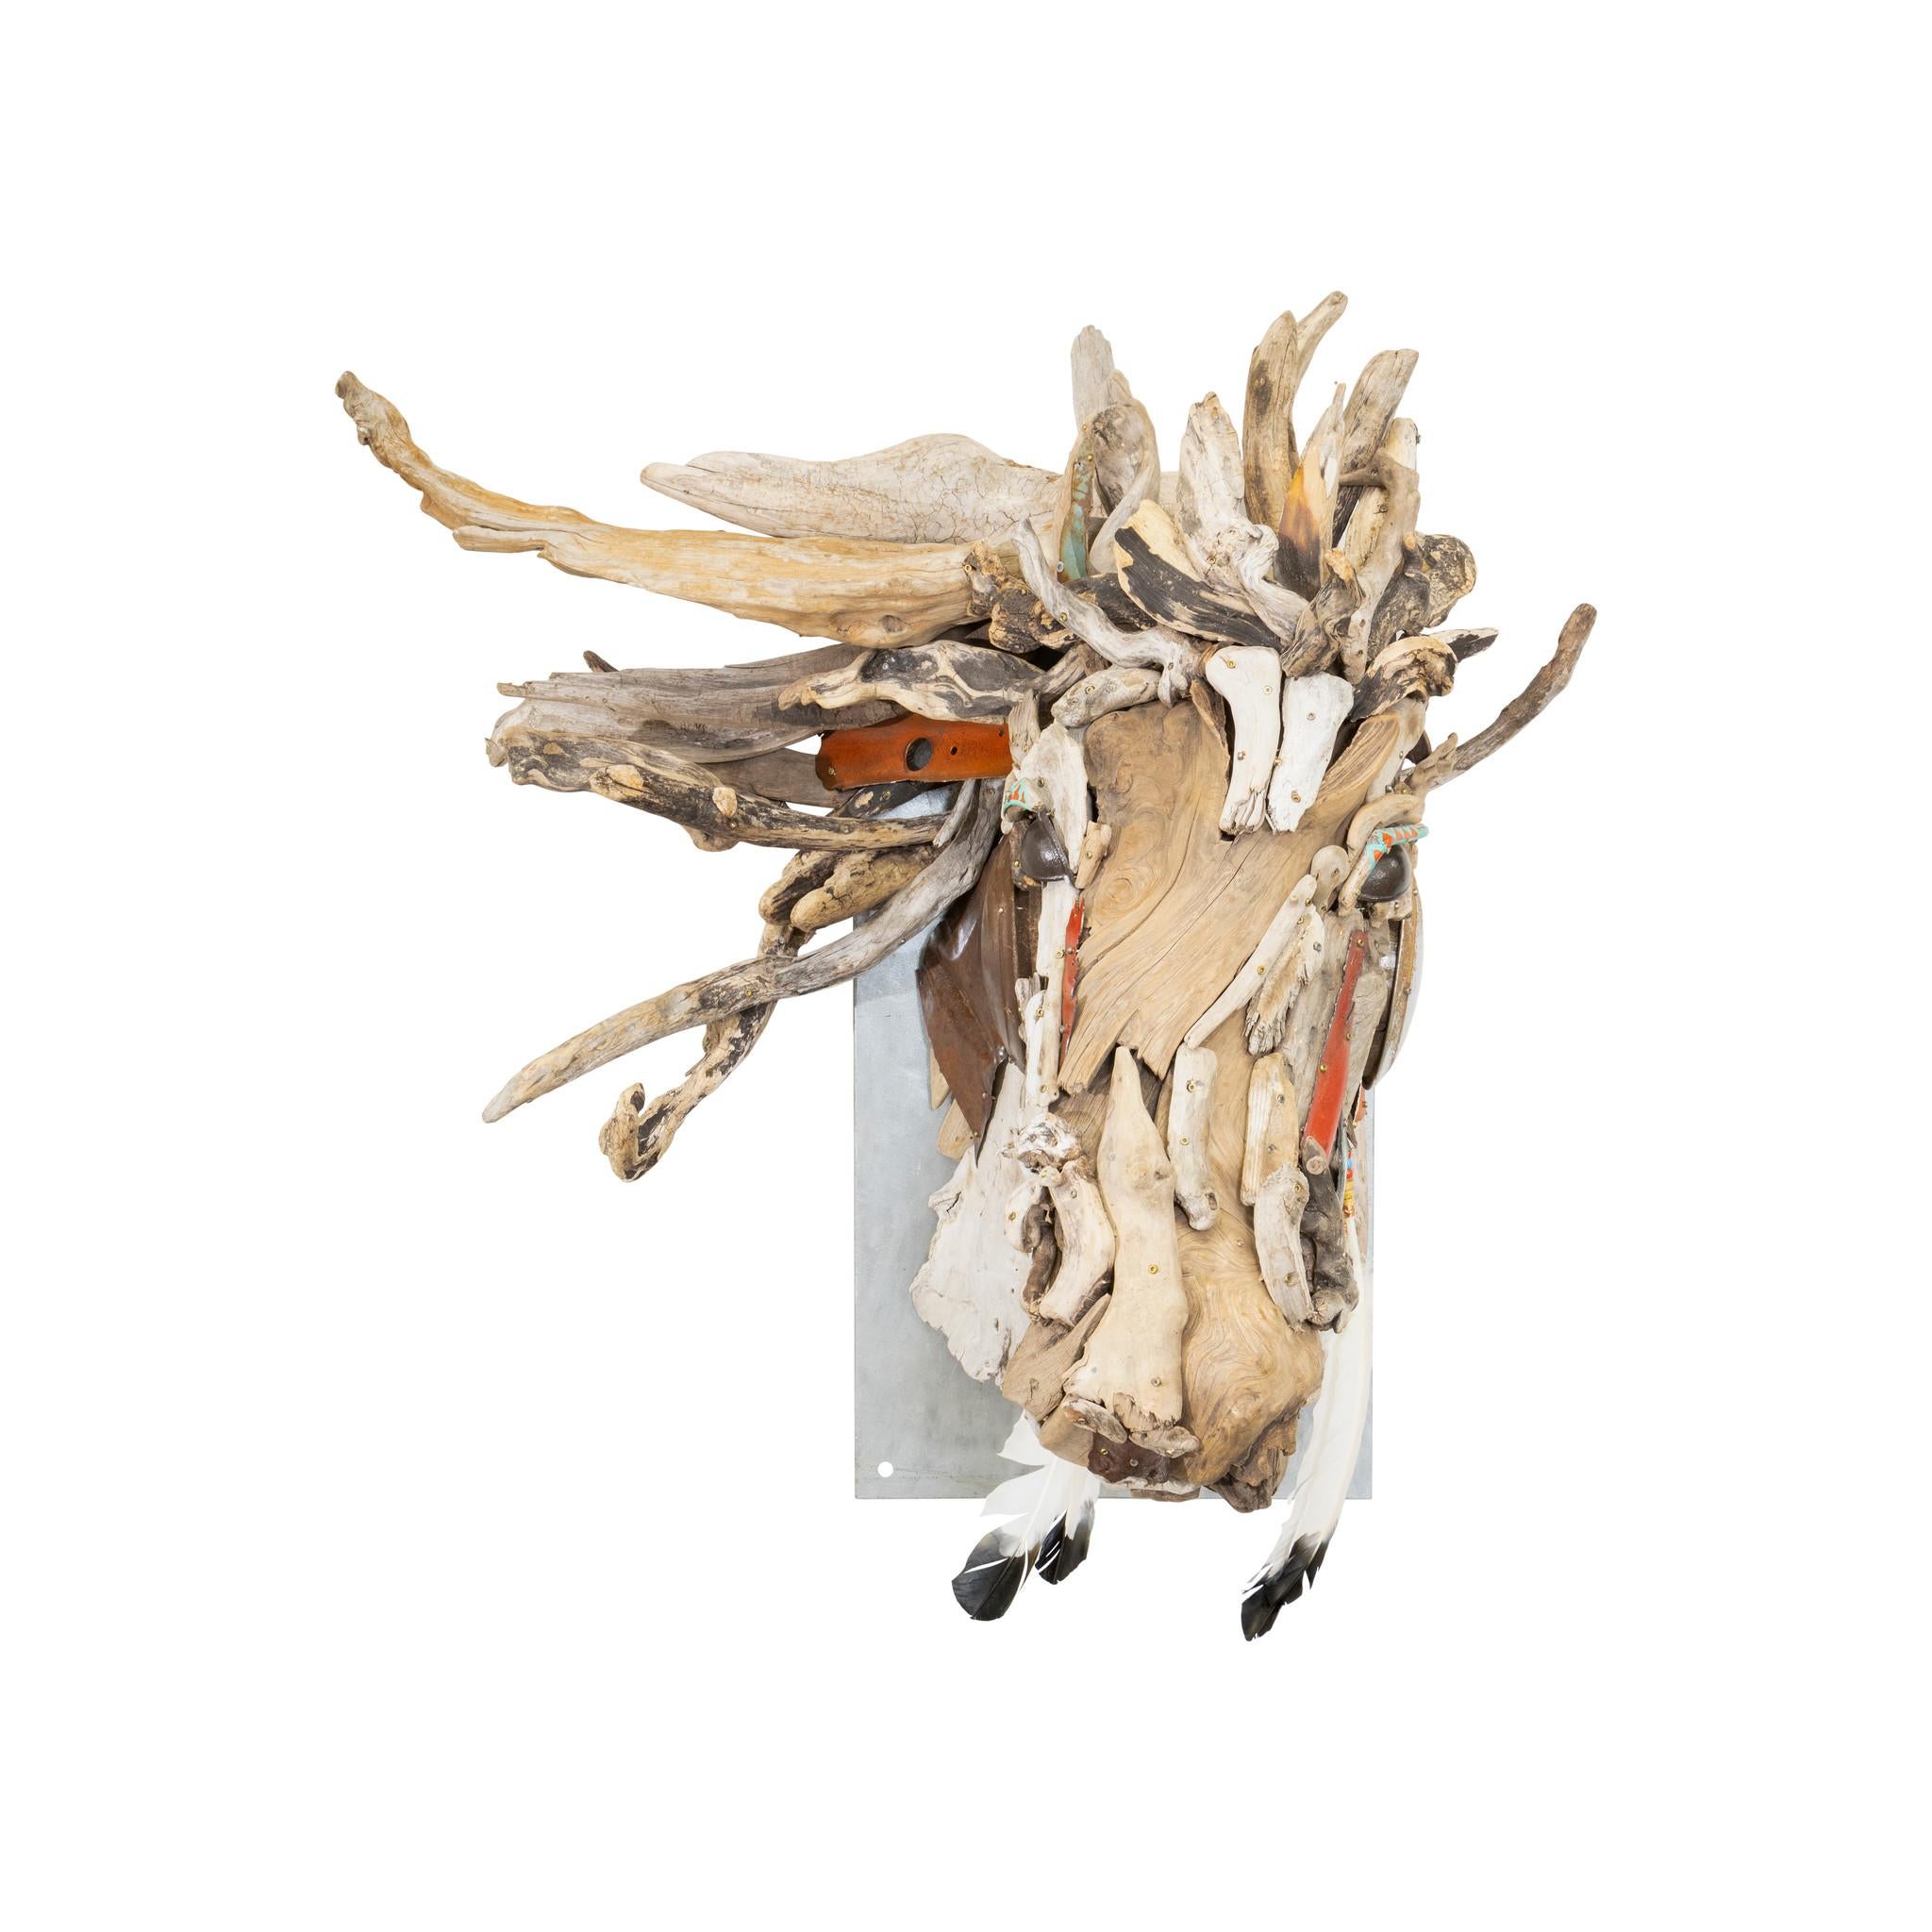 Driftwood horse bust wall mount of driftwood and scrap yard steel by a Montana artist by Tina Milsavljevich. Tina grew up in the beauty of Colorado, the breath-taking rugged mountains and wildlife served as a peaceful and inspirational backdrop.